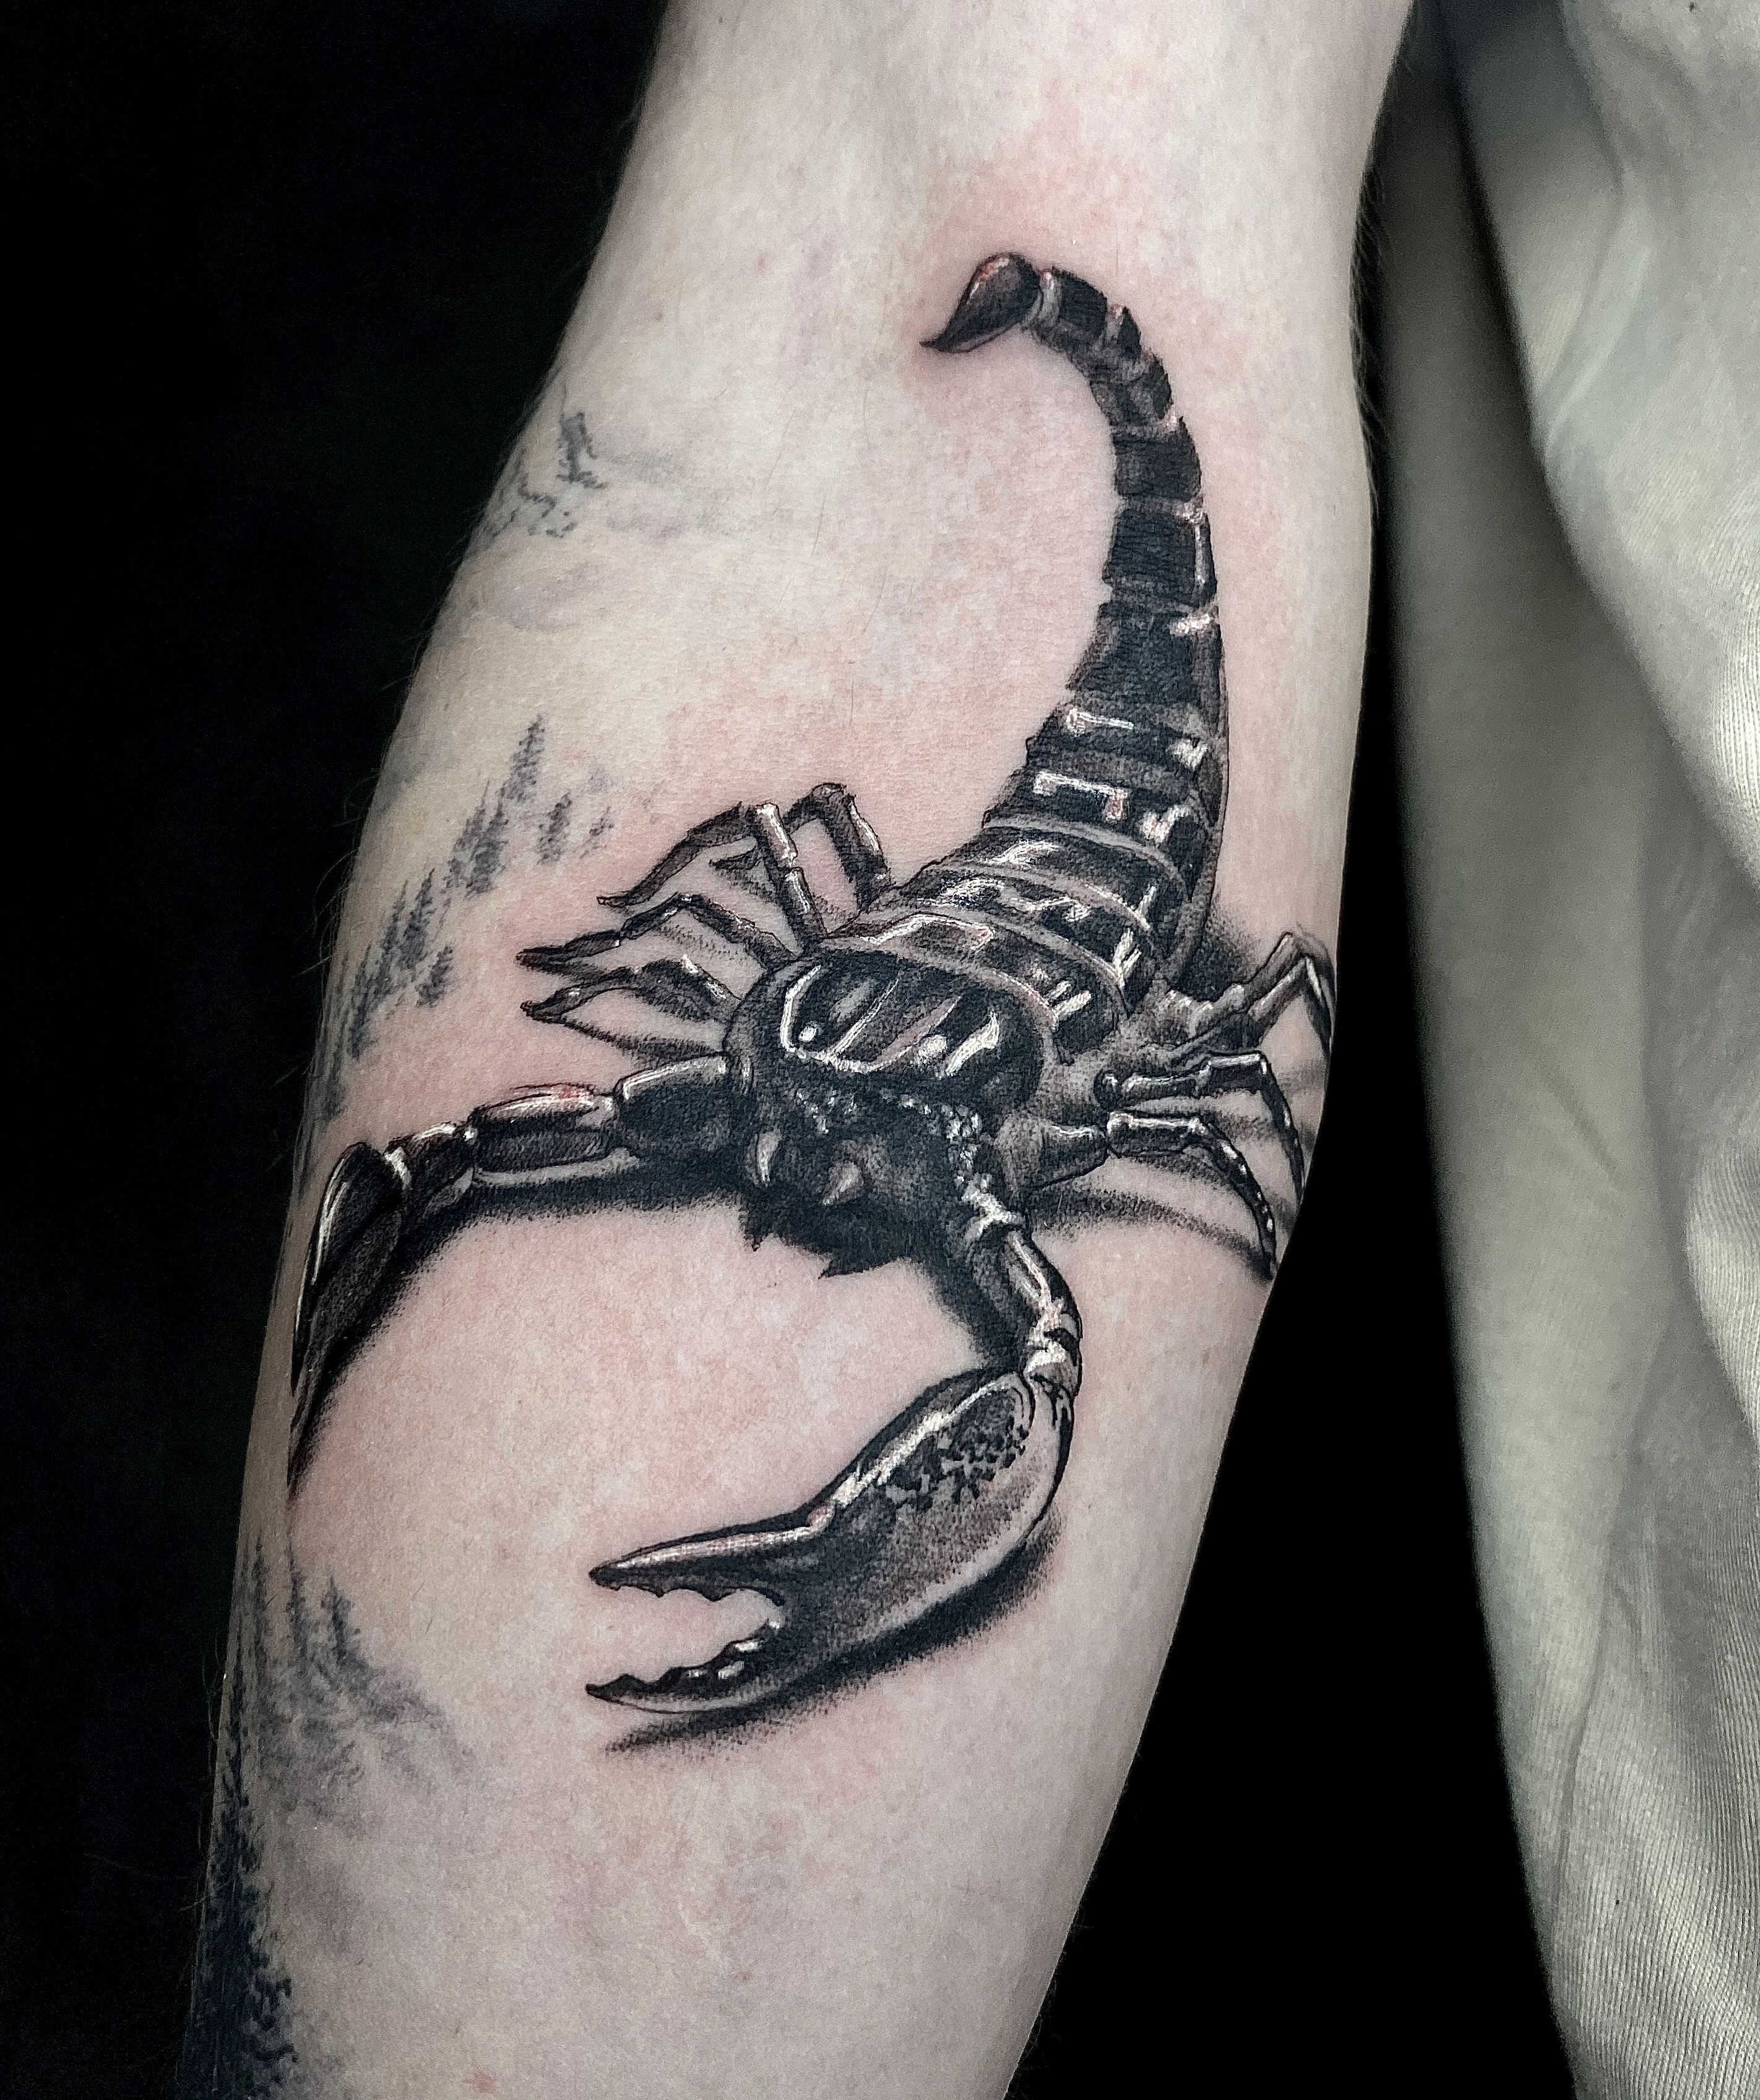 Scorpion tattoo its part of my arm sleeve done by my favorite artist in  Lynn mass  rtattoo